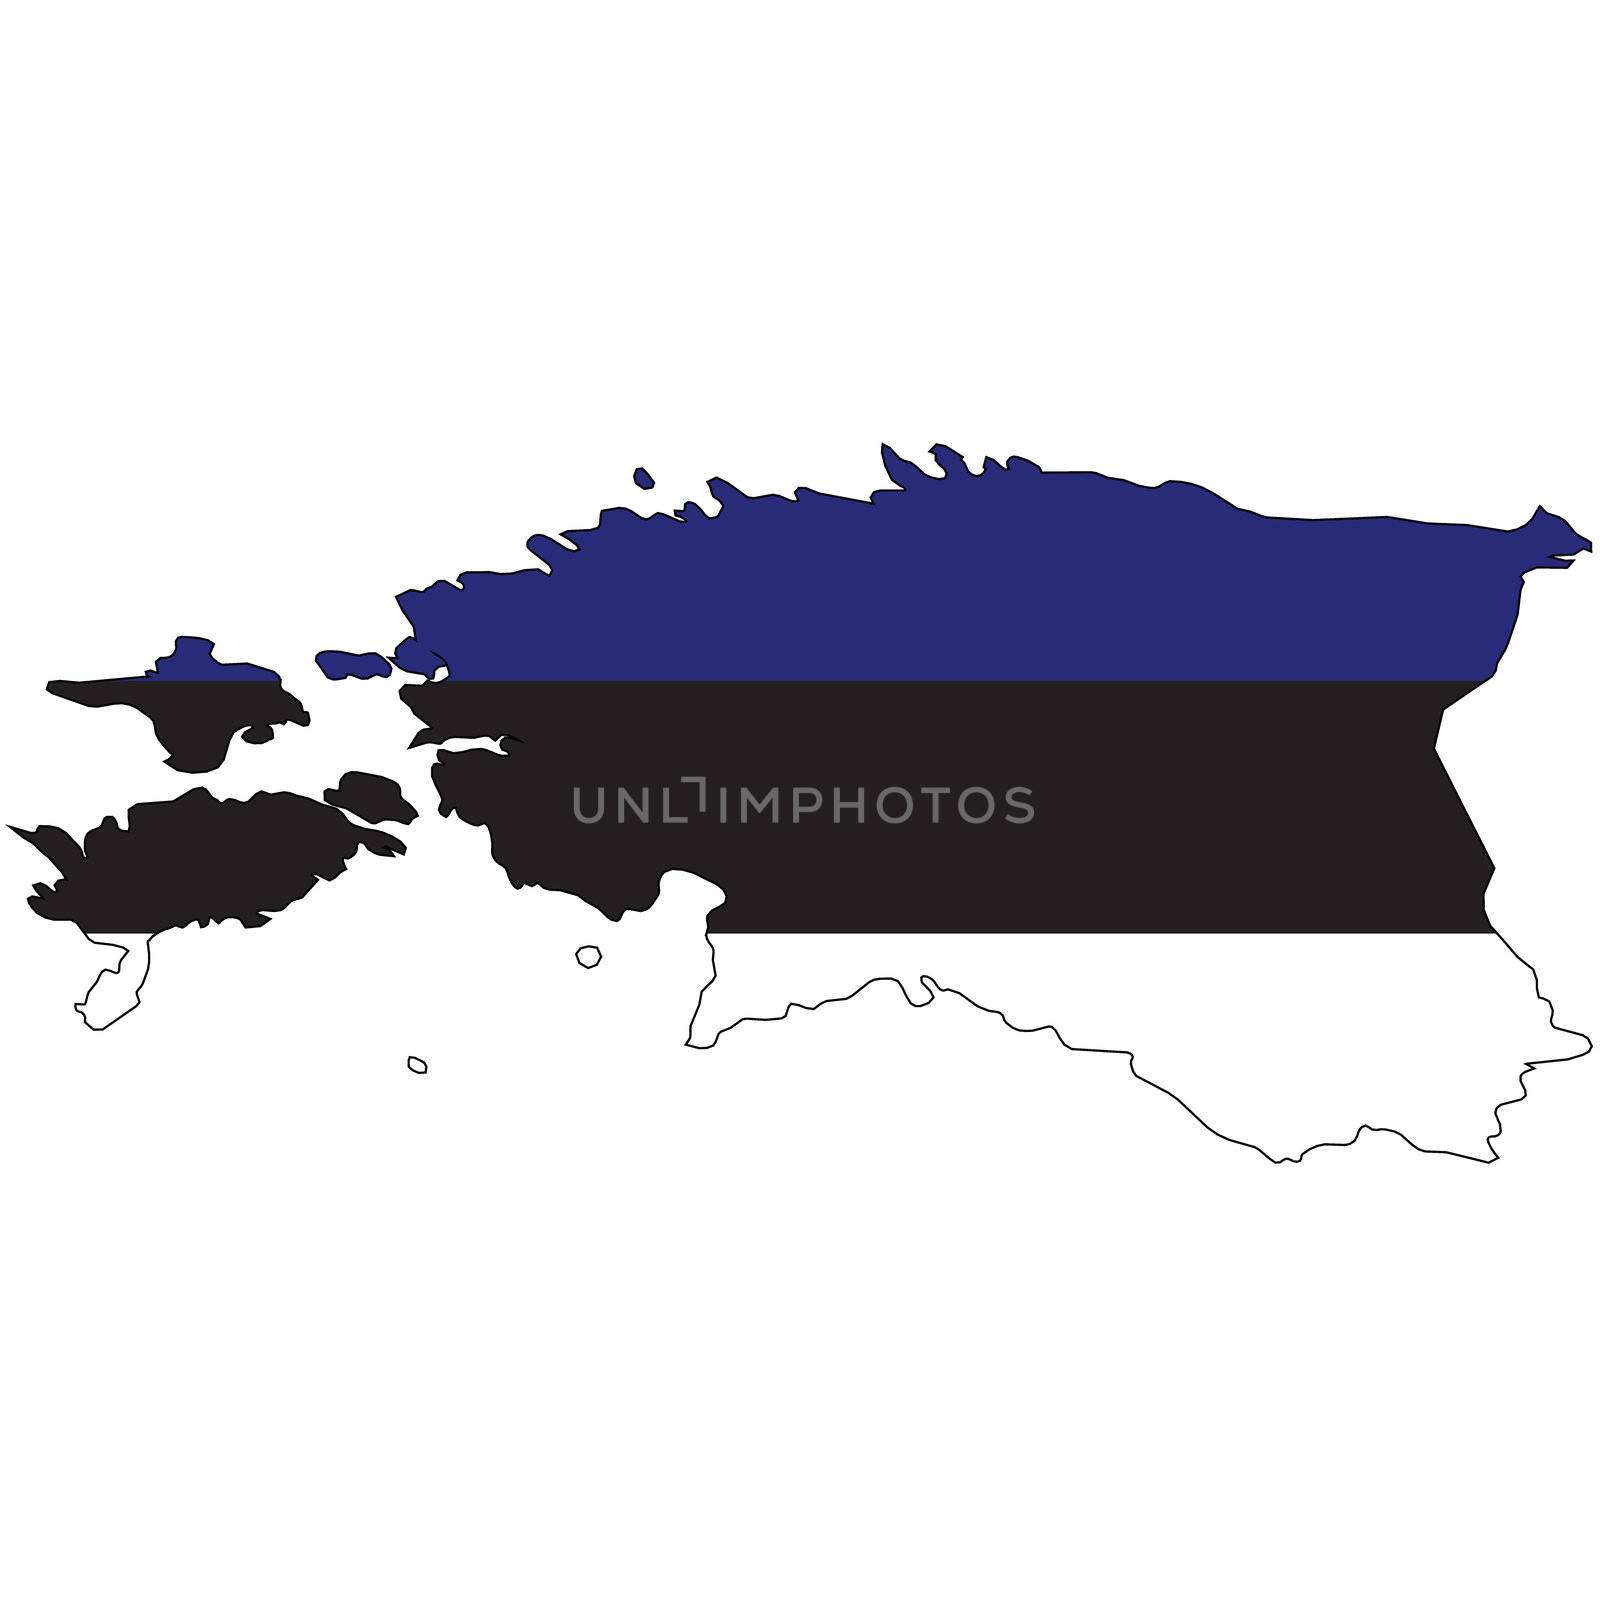 Country outline with the flag of Estonia in it